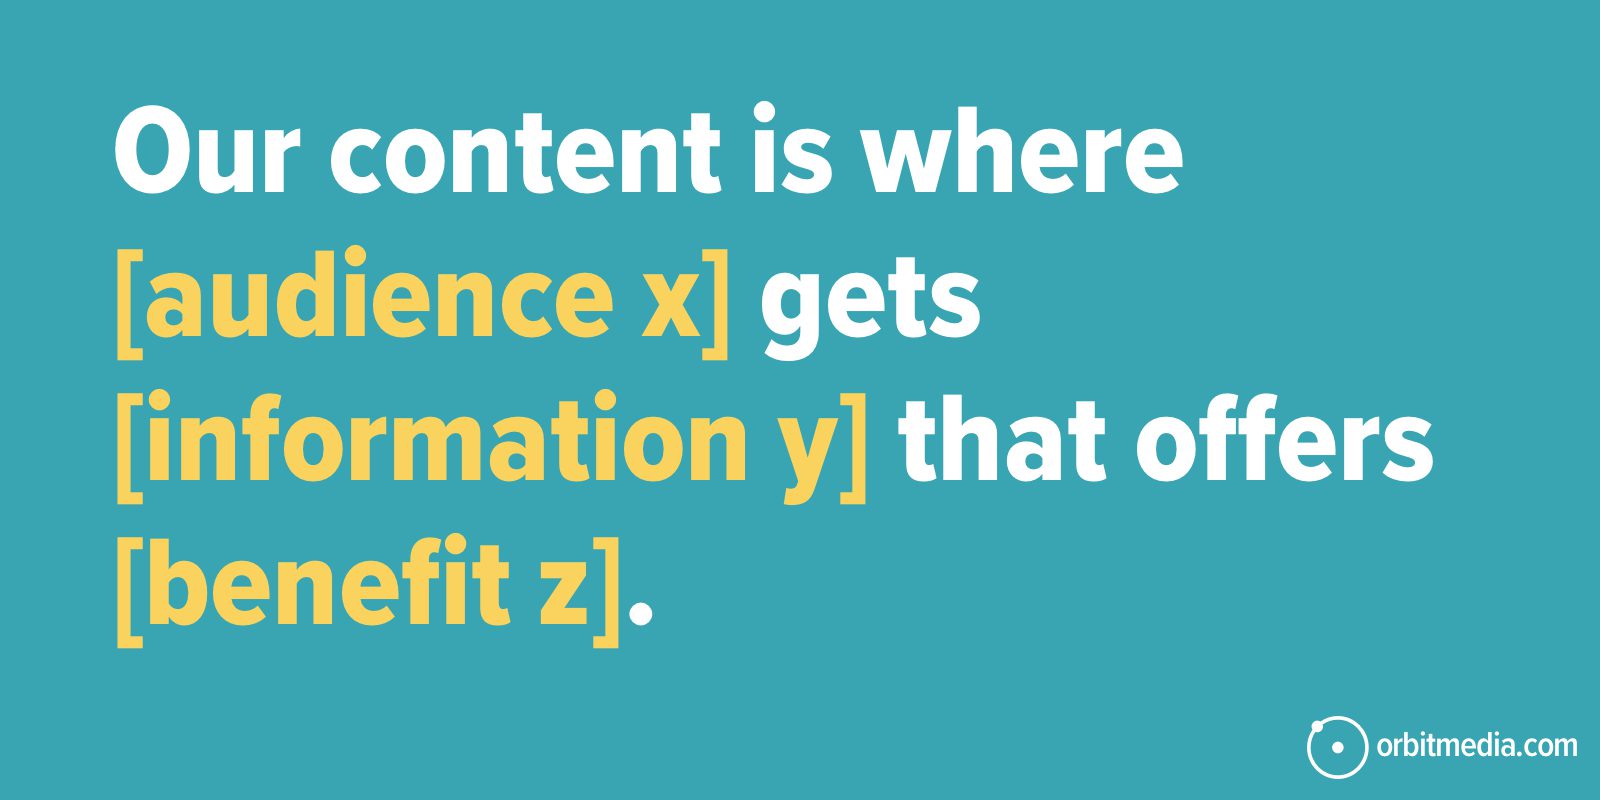 our content is where audience X gets information Y that offers benefit Z